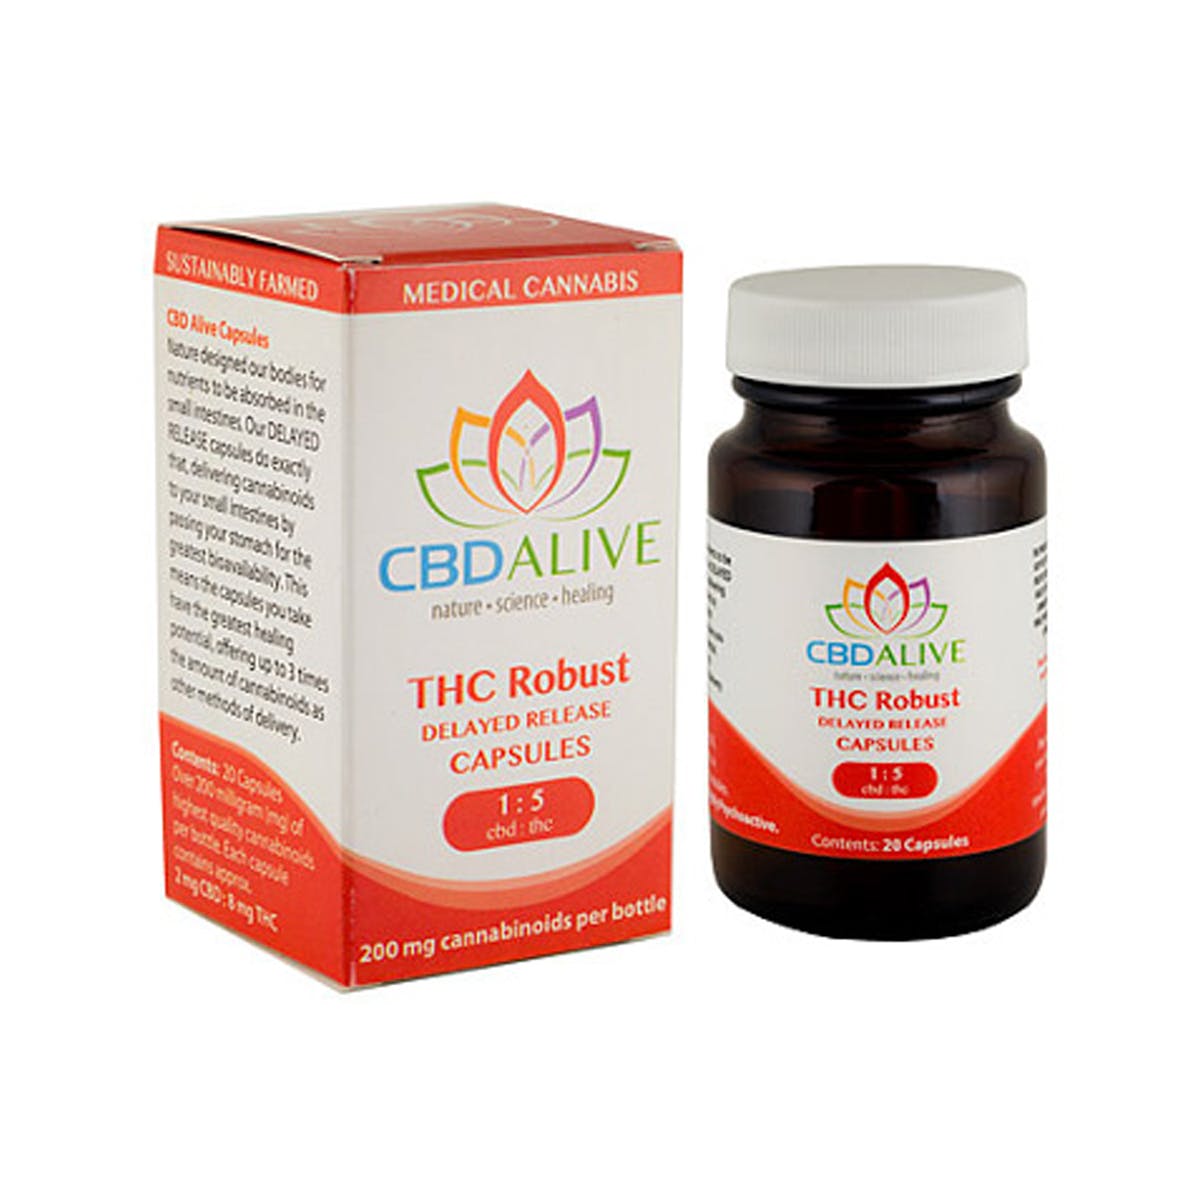 edible-thc-robust-delayed-release-capsules-15-cbdthc